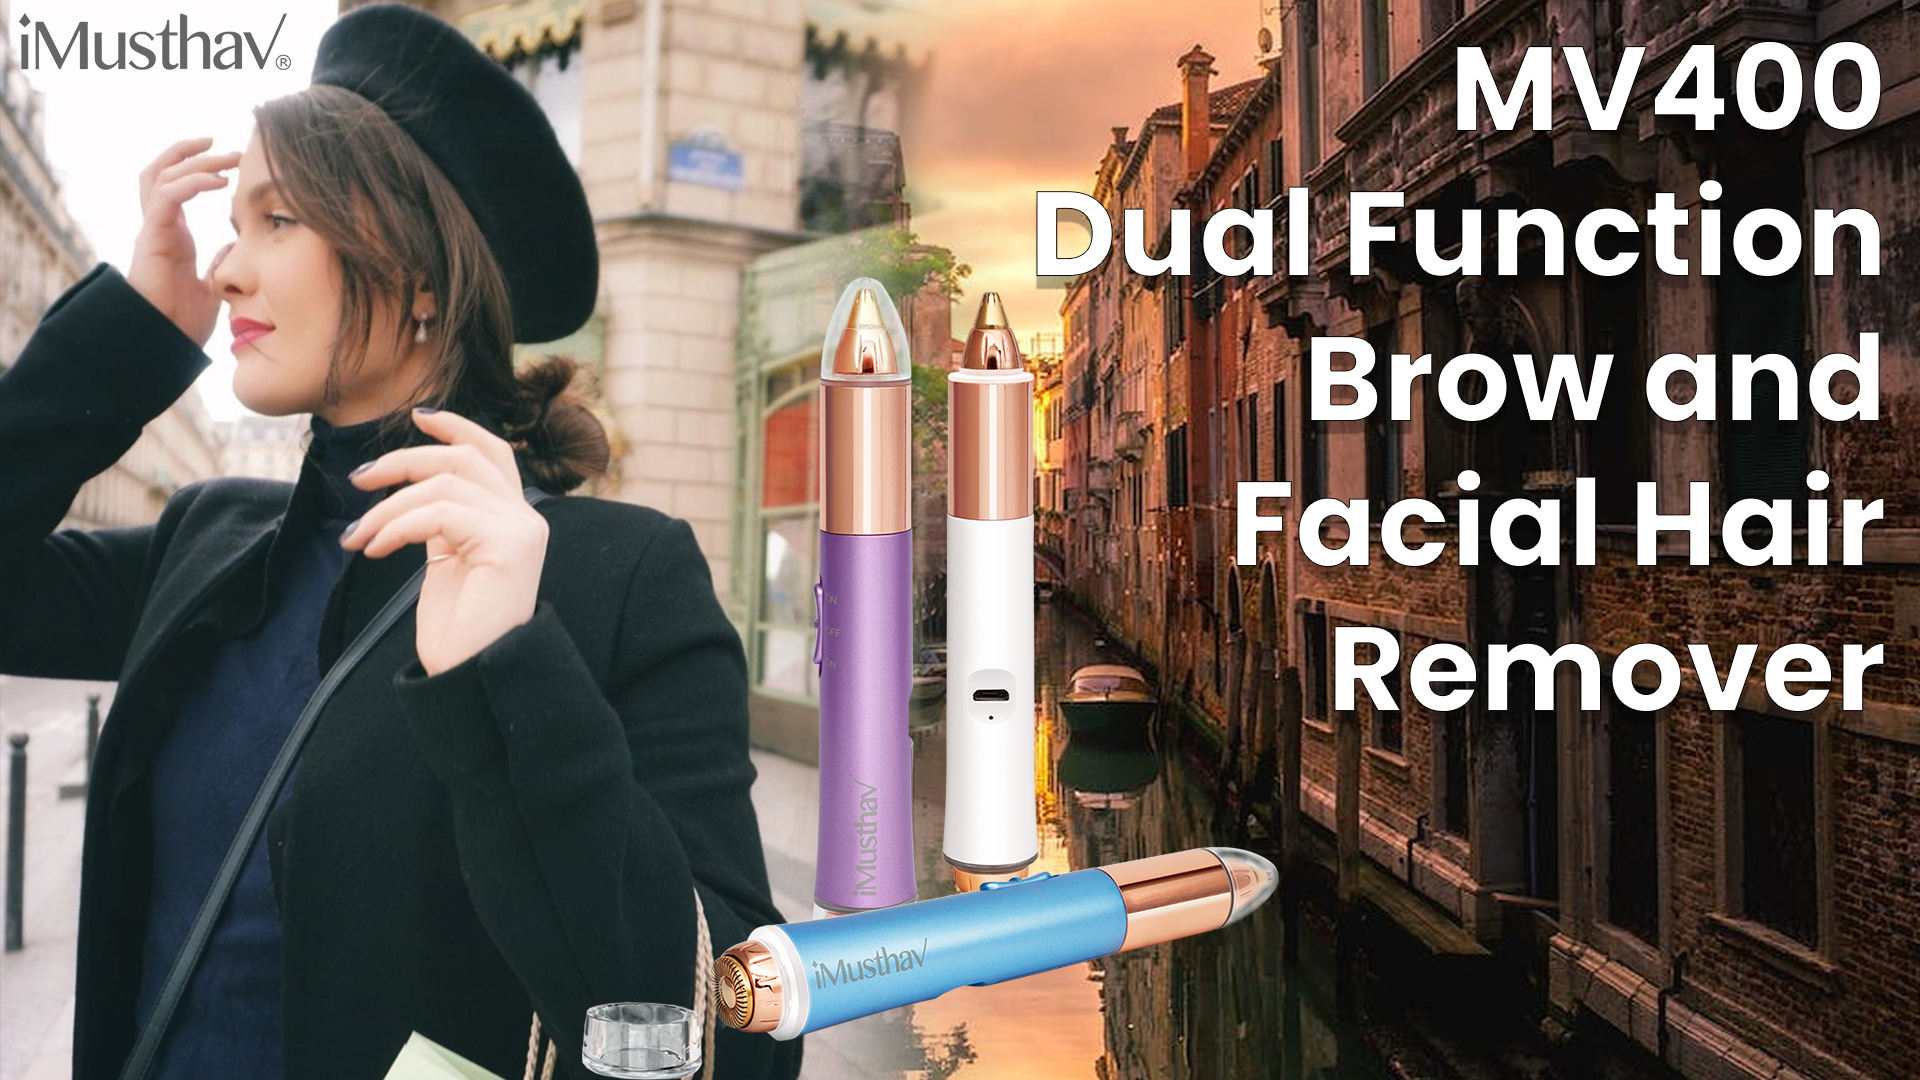 You are currently viewing iMusthav® Dual Function Brow and Facial Hair Remover MV400 | REVIEW & DEMO | Laura Dirtu | Italian with English Subtitle